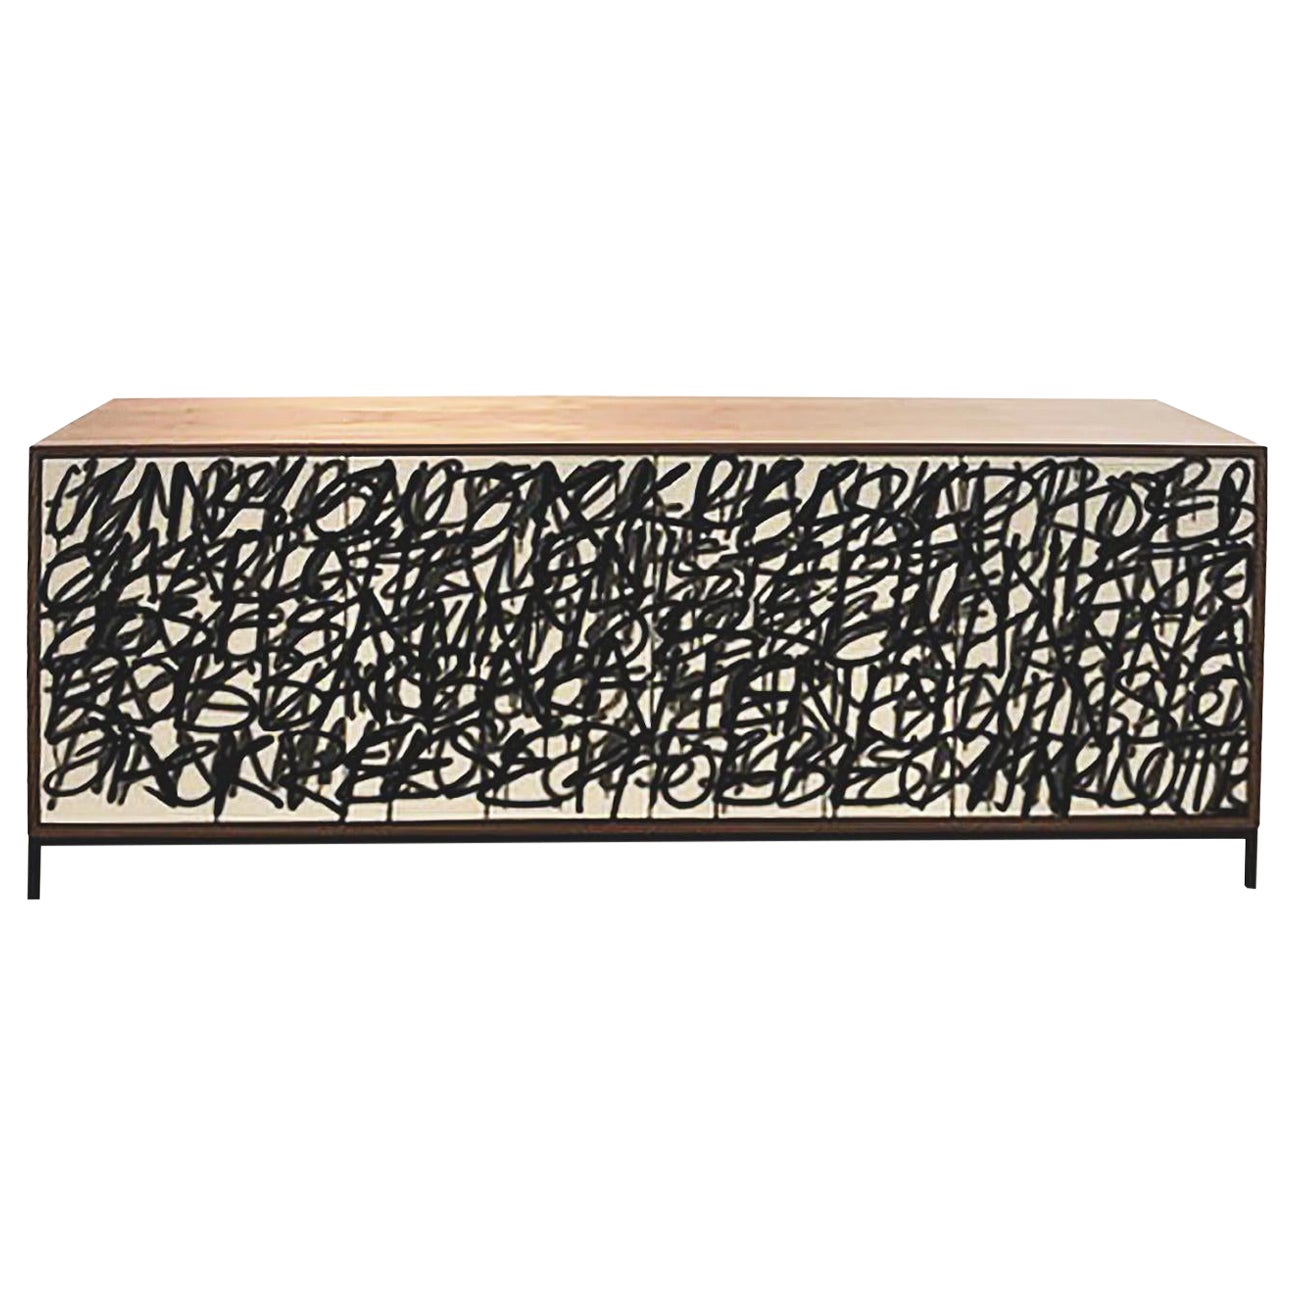 Say It Again graffiti credenza by Morgan Clayhall, mix media artwork on doors For Sale